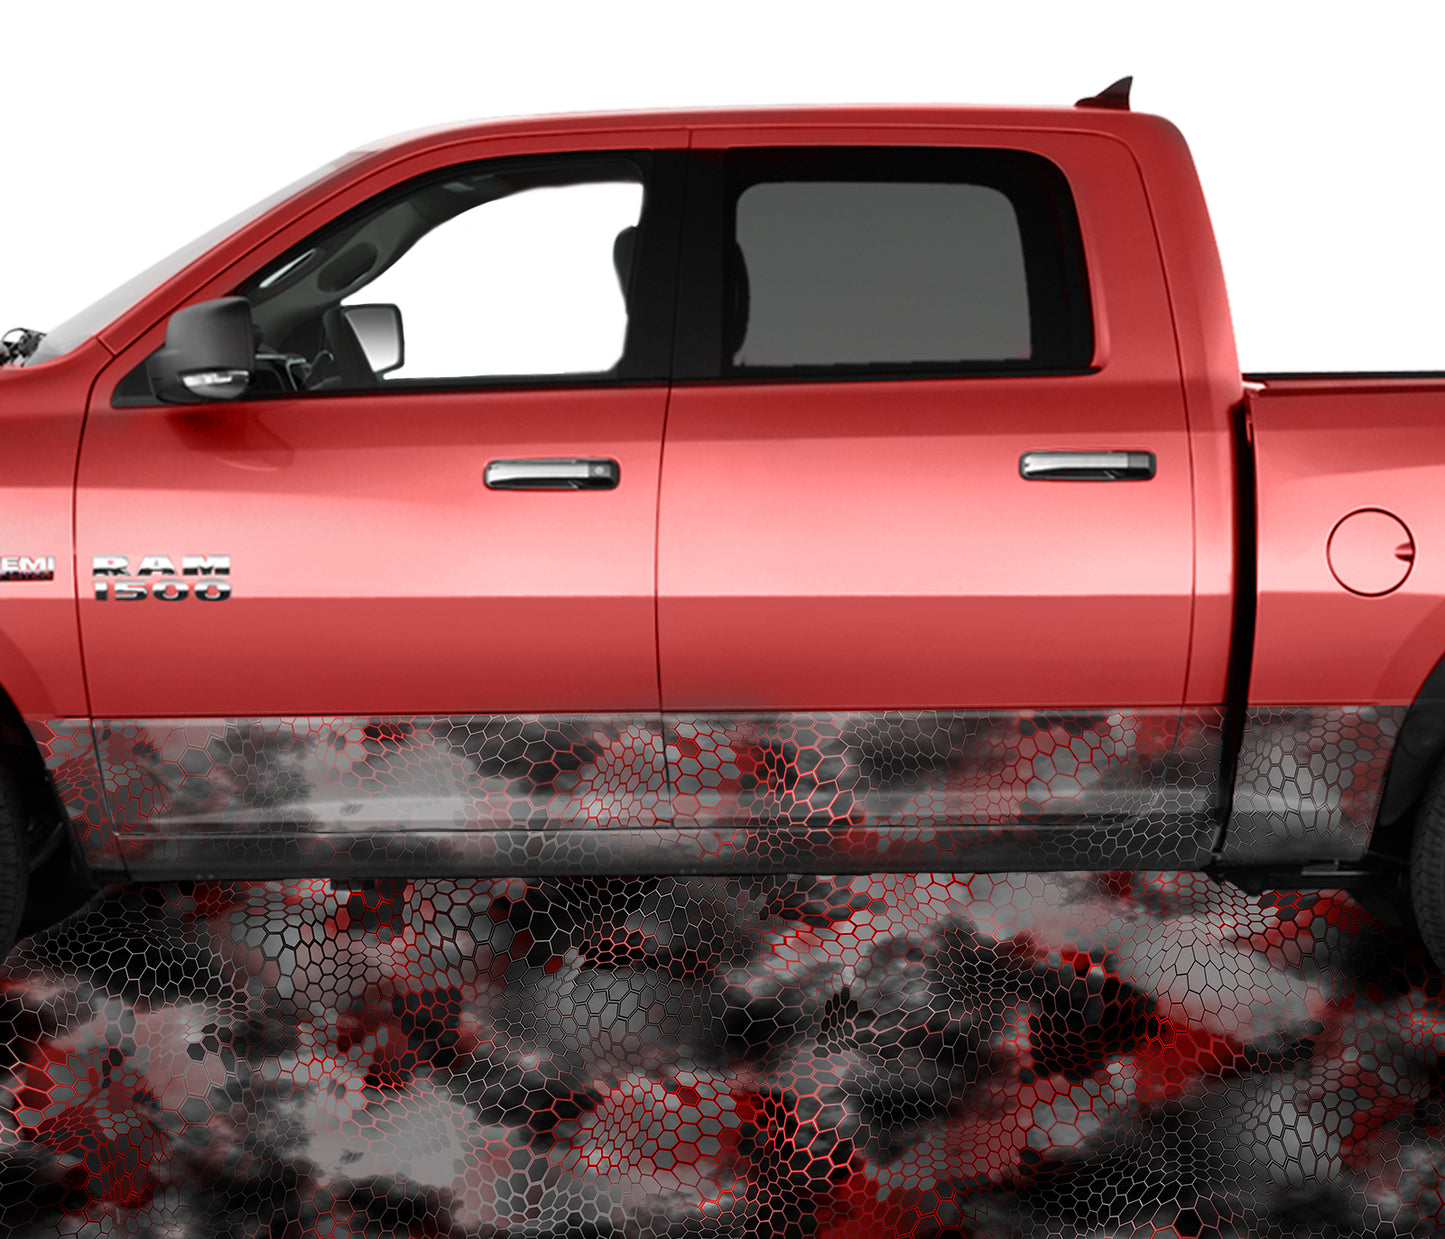 Chameleon Camo 2 Red Rocker Panel Wrap Graphic Decal Wrap Truck Kit